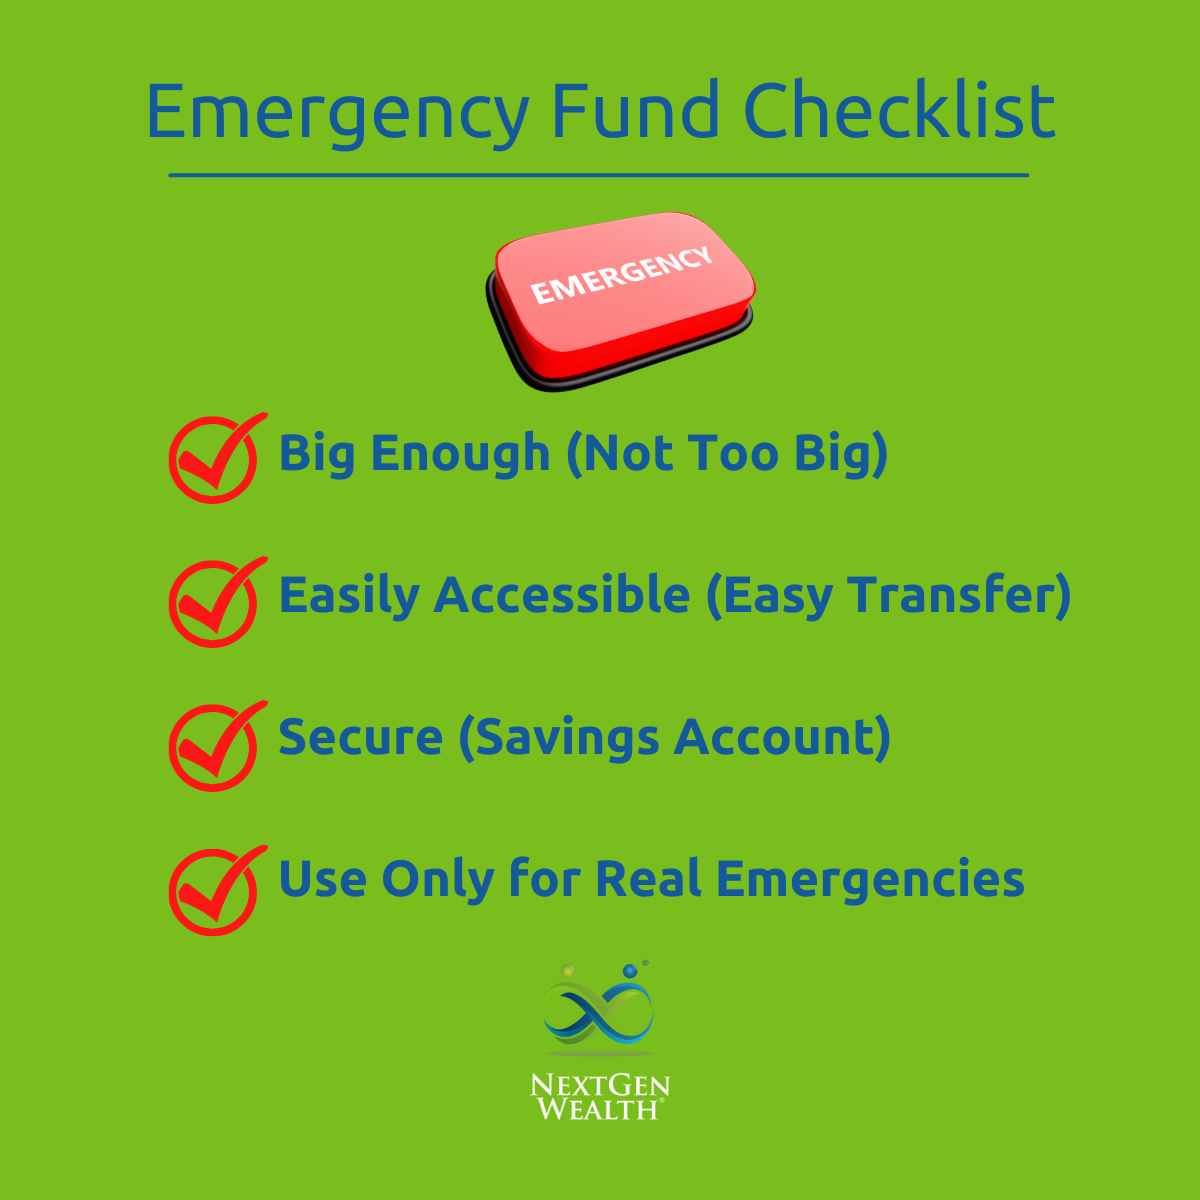 Everything You Should Know About an Emergency Fund